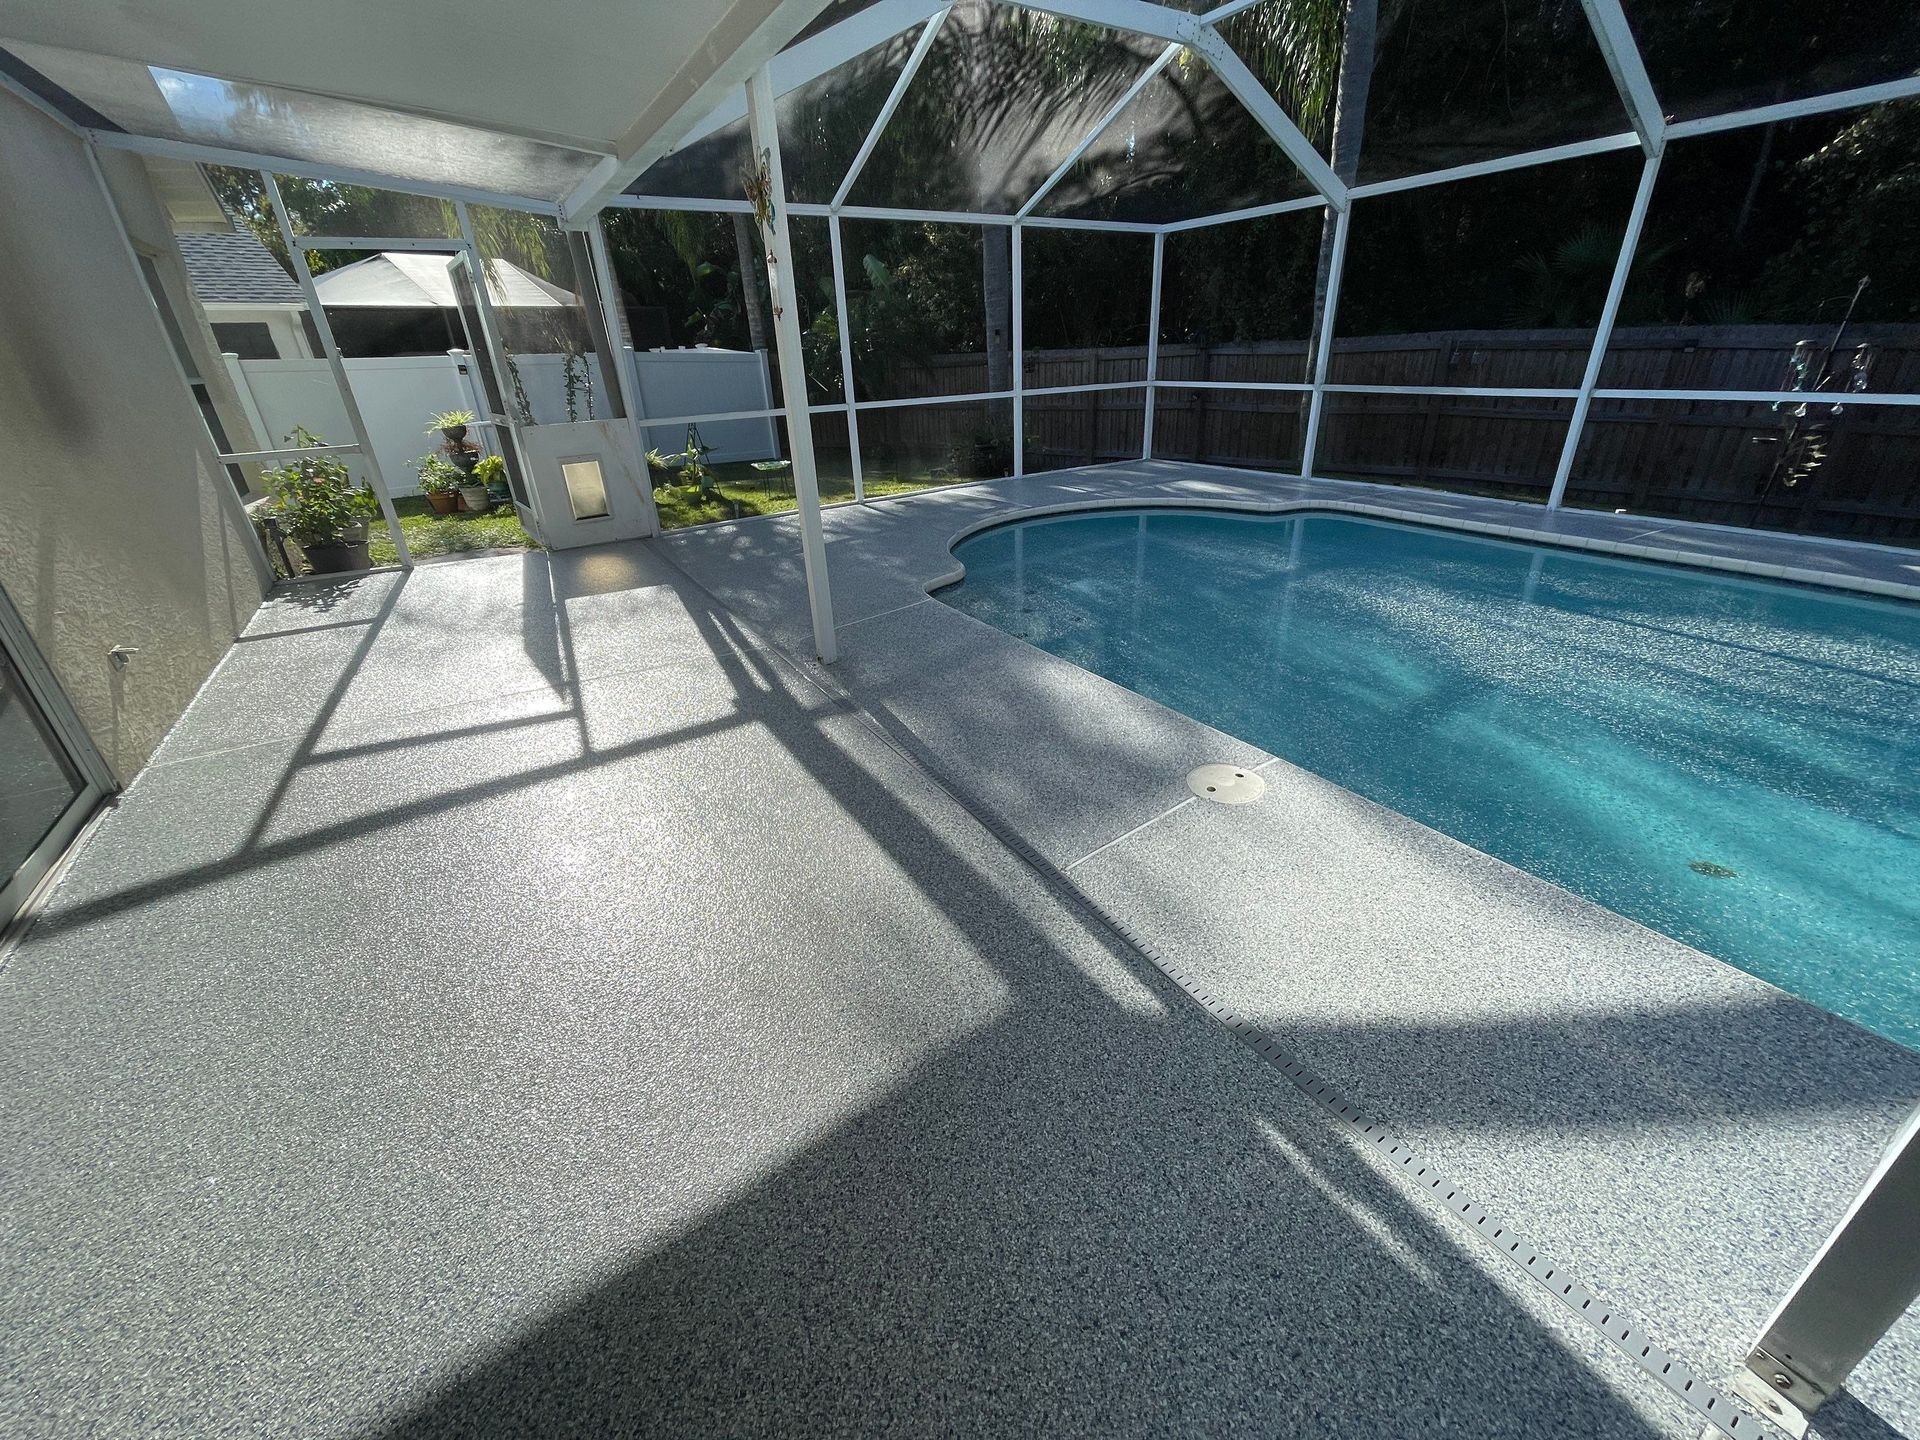 New concrete coating installed on a concrete pool deck surrounding turquoise water